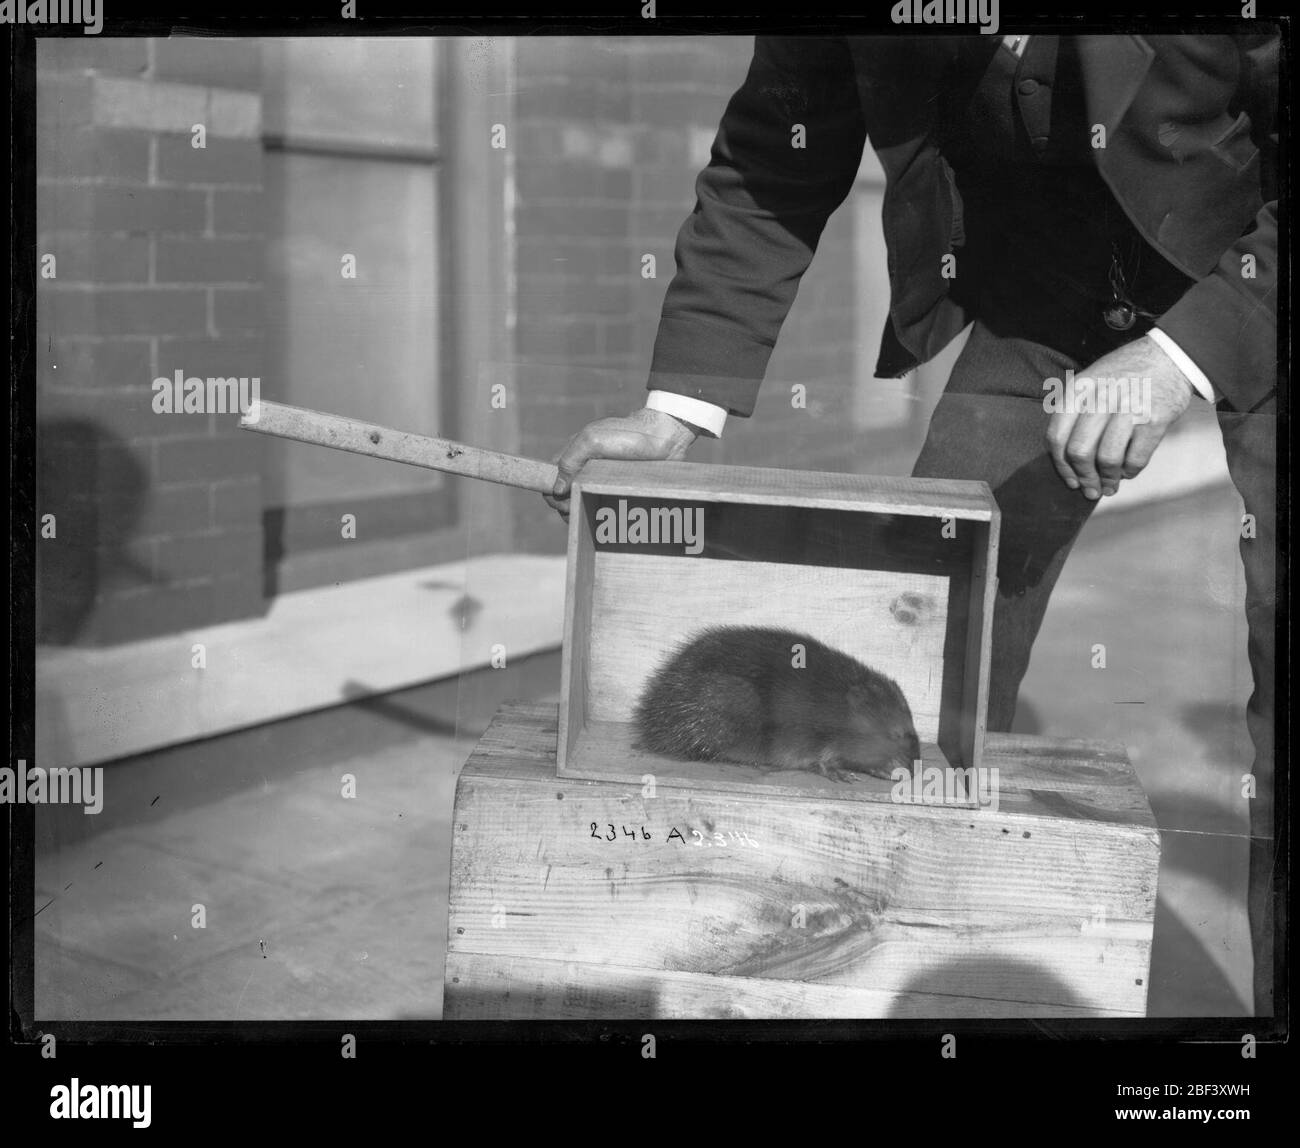 Coypu in Crate. Unidentified man with coypu in crate outside the United States National Museum, now known as the Arts and Industries Building.Smithsonian Institution Archives, Acc. 11-007, Box 008, Image No. Stock Photo